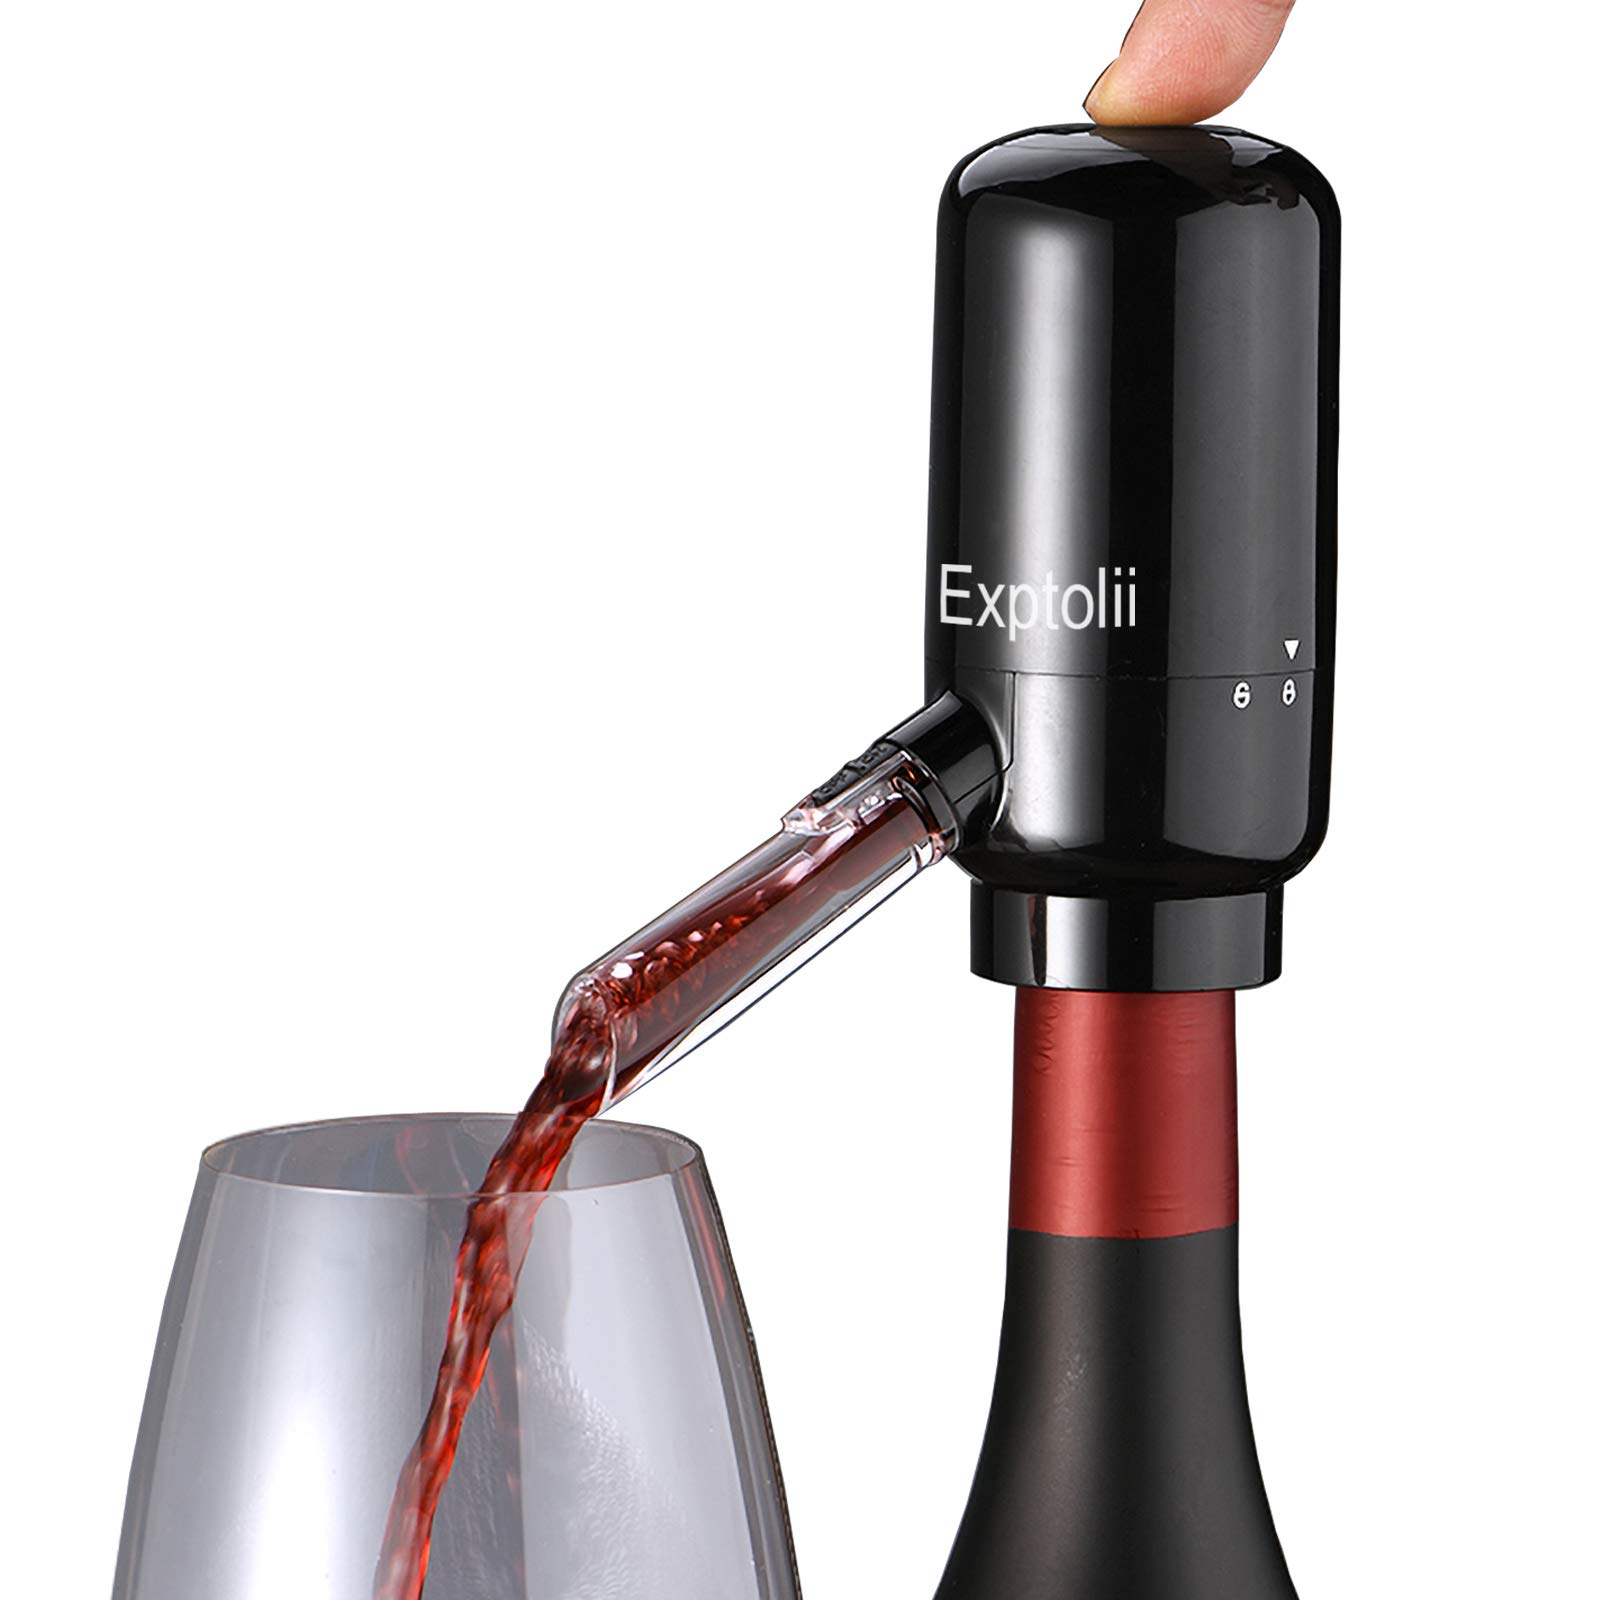 Exptolii Electric Wine Aerator Pourer, Automatic One-Touch Wine Decanter and Wine Dispenser Pump Wine Oxidizer for Red and White Wine